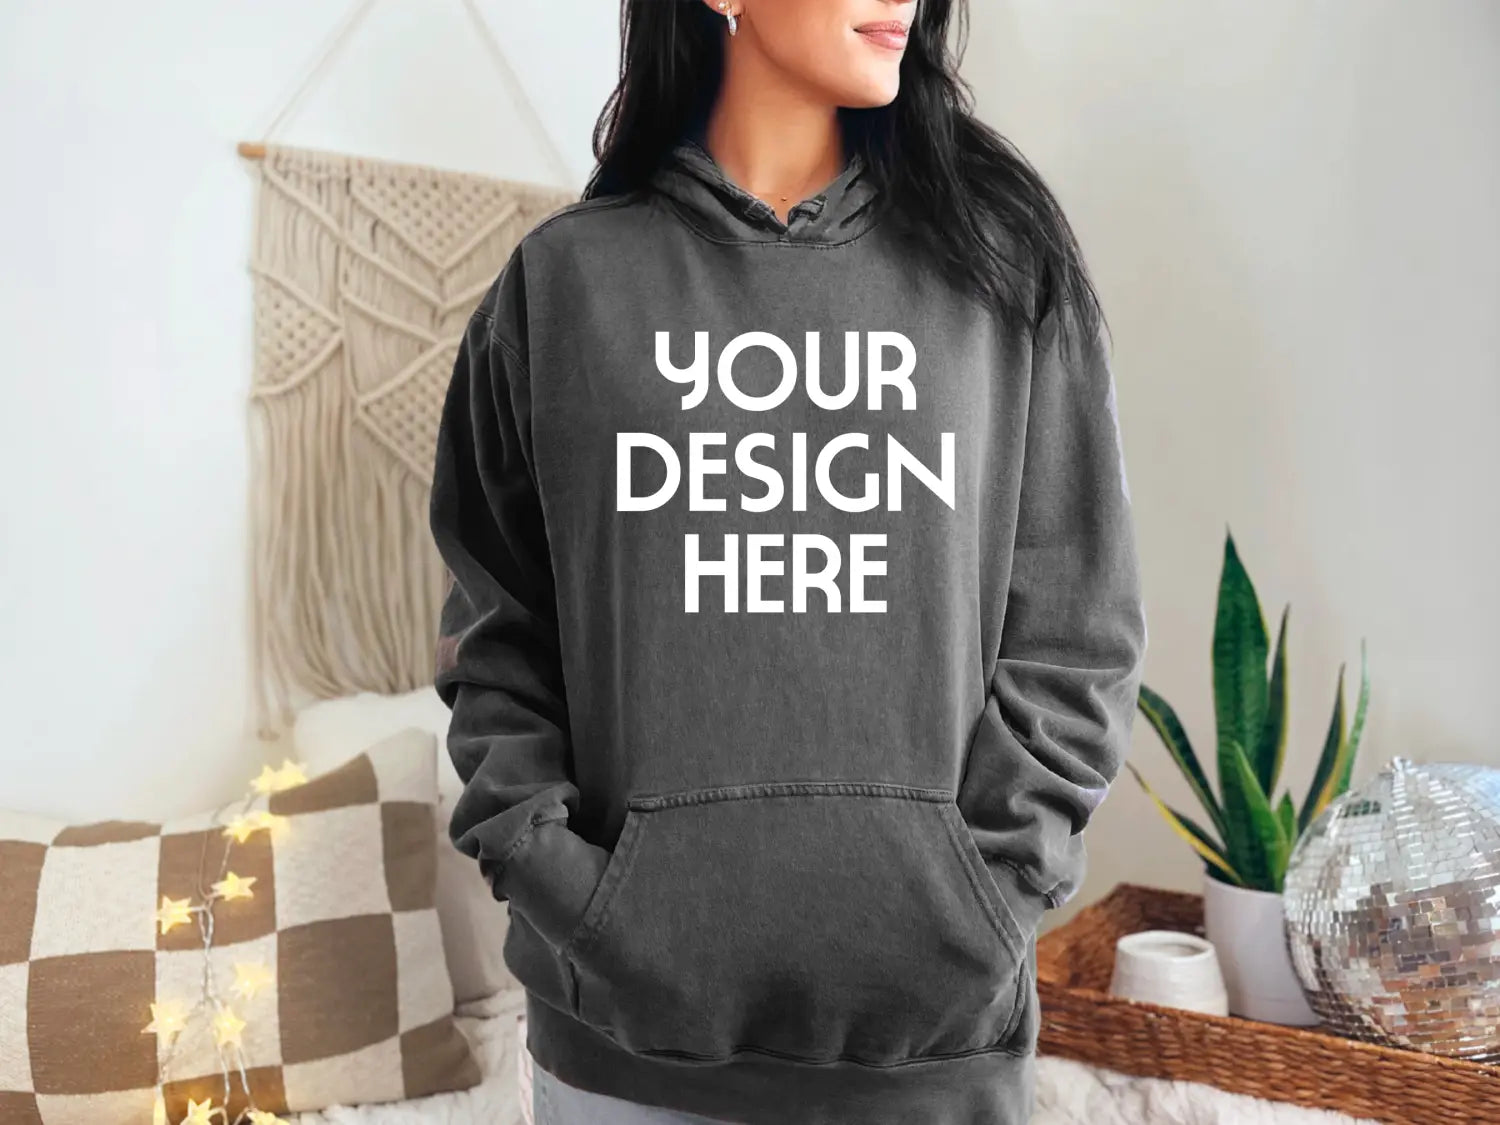 Create your own hoodie!